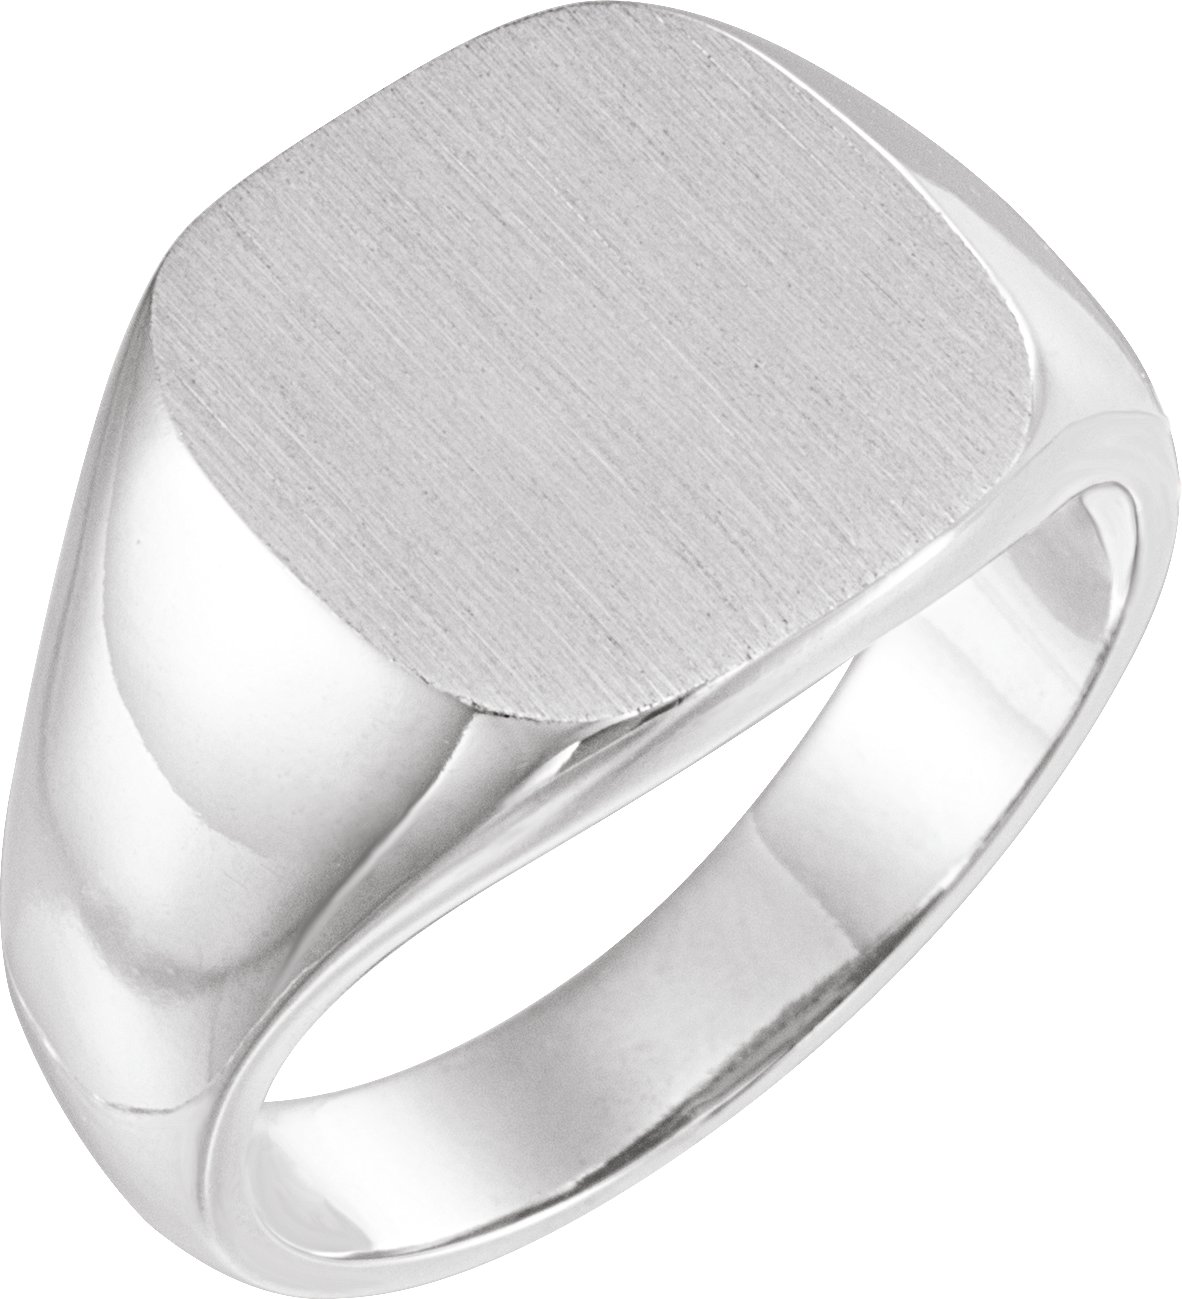 Sterling Silver 18 mm Square Signet Ring
